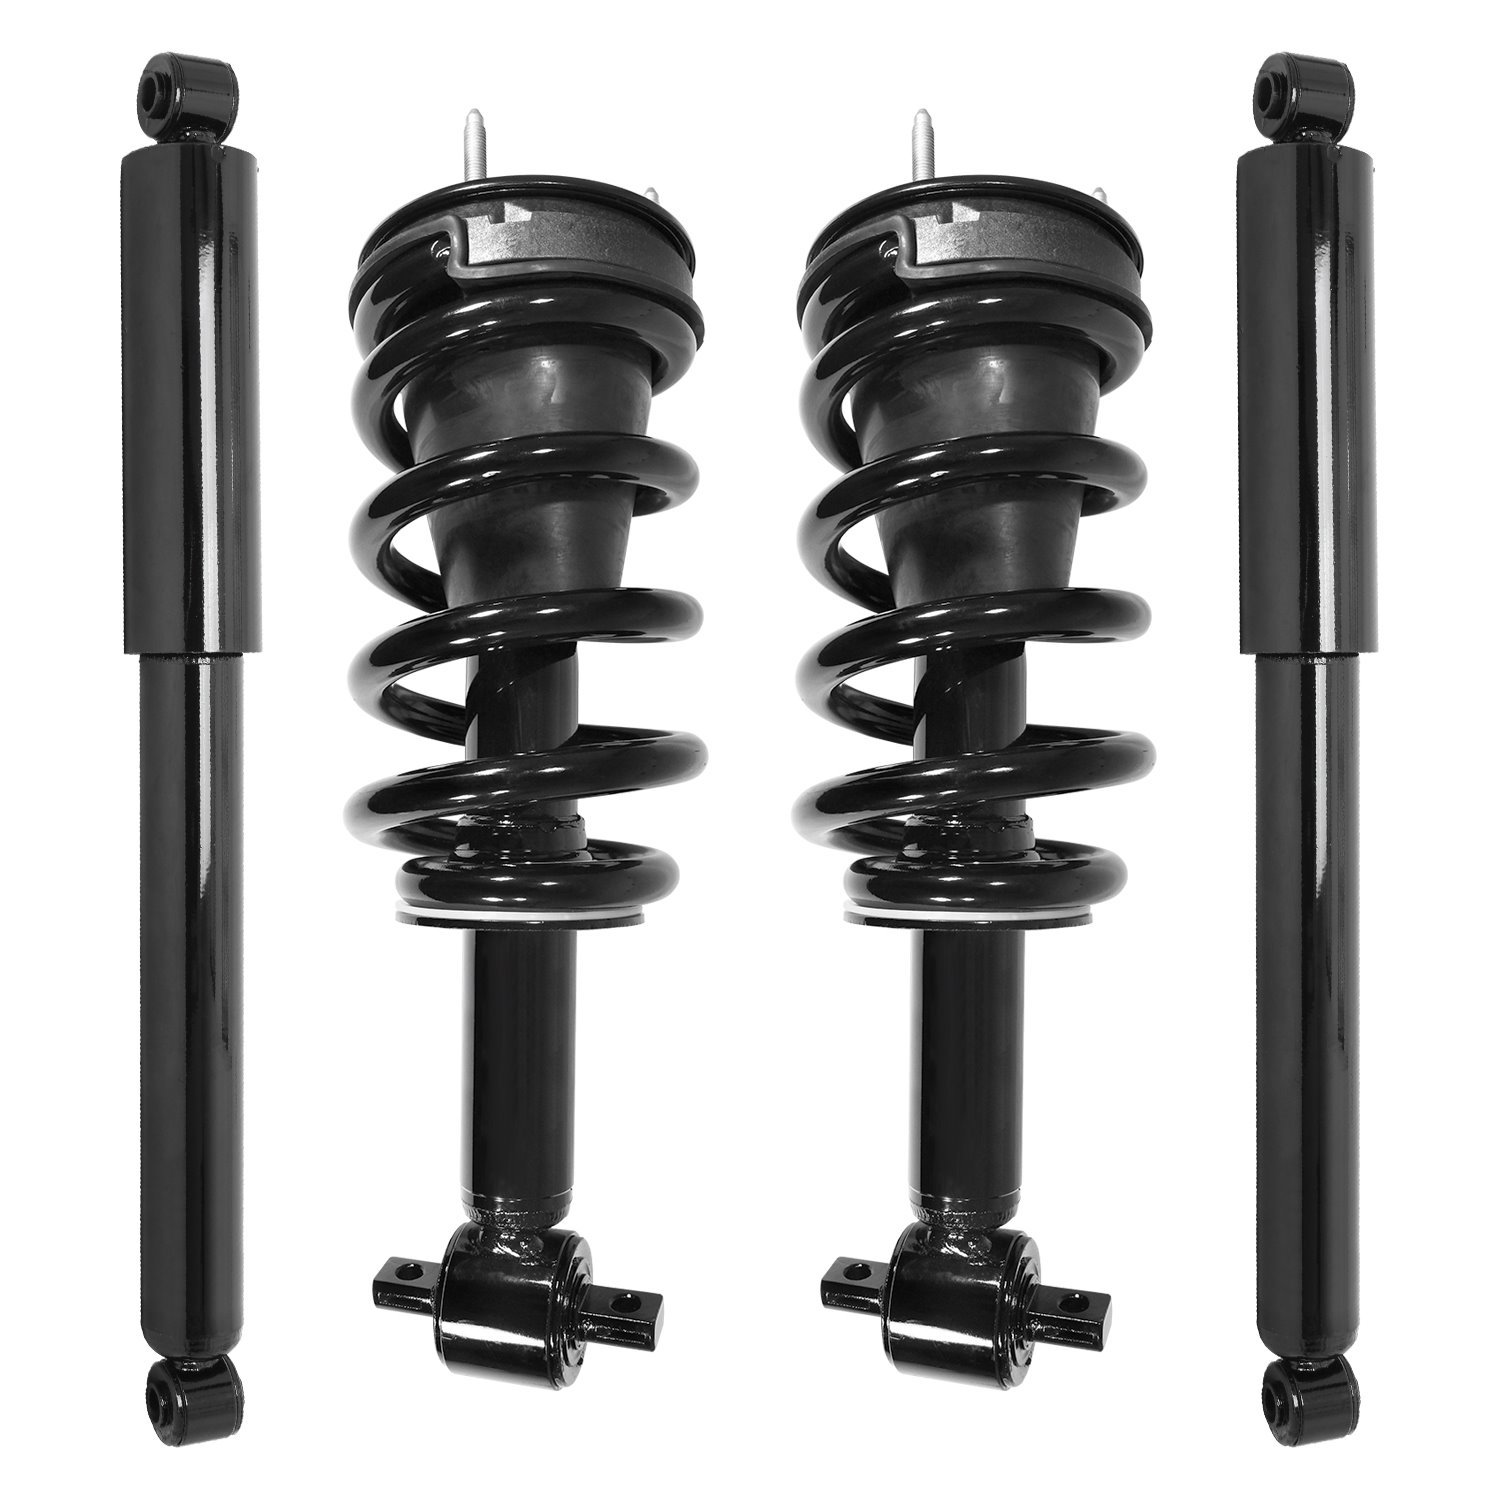 4-11590-251400-001 Front & Rear Suspension Strut & Coil Spring Assembly Fits Select GM